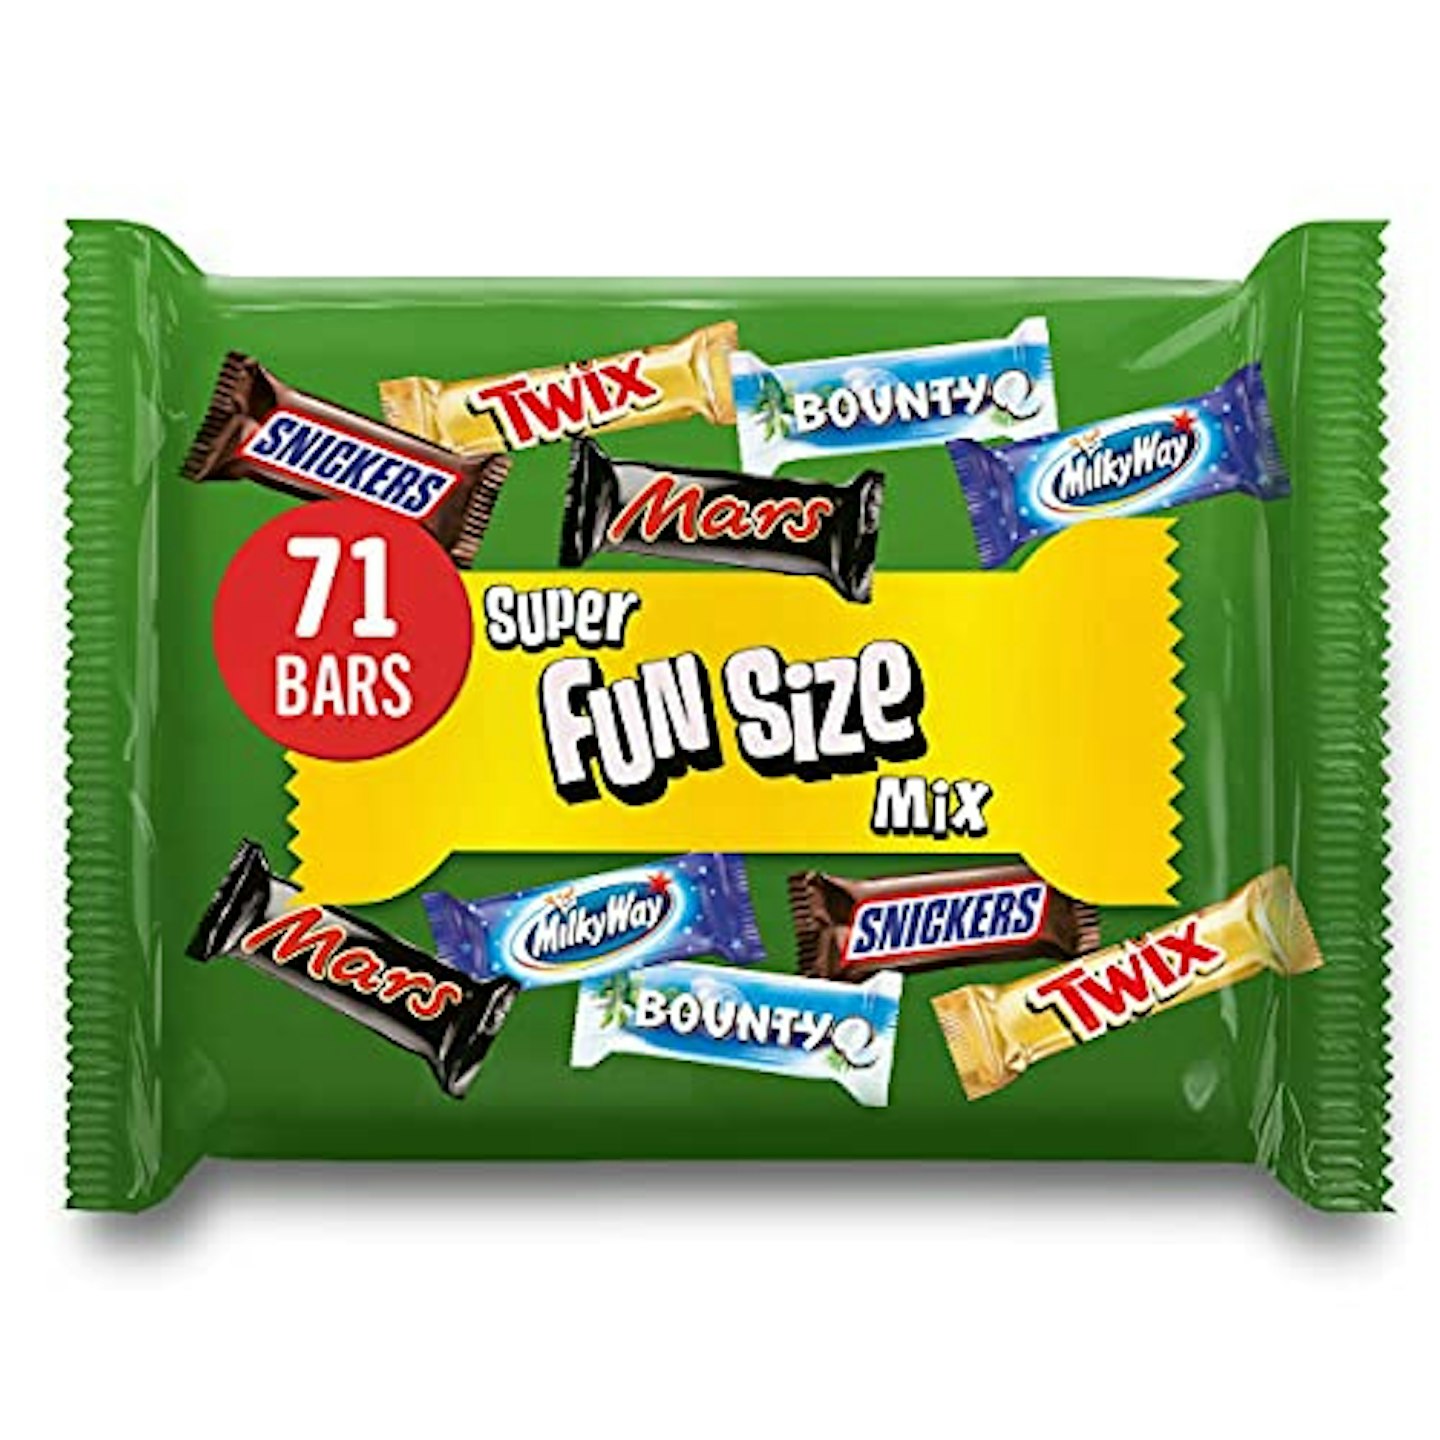 Mars, Snickers, Twix and More Assorted Minis, Fun Size Chocolate Bars